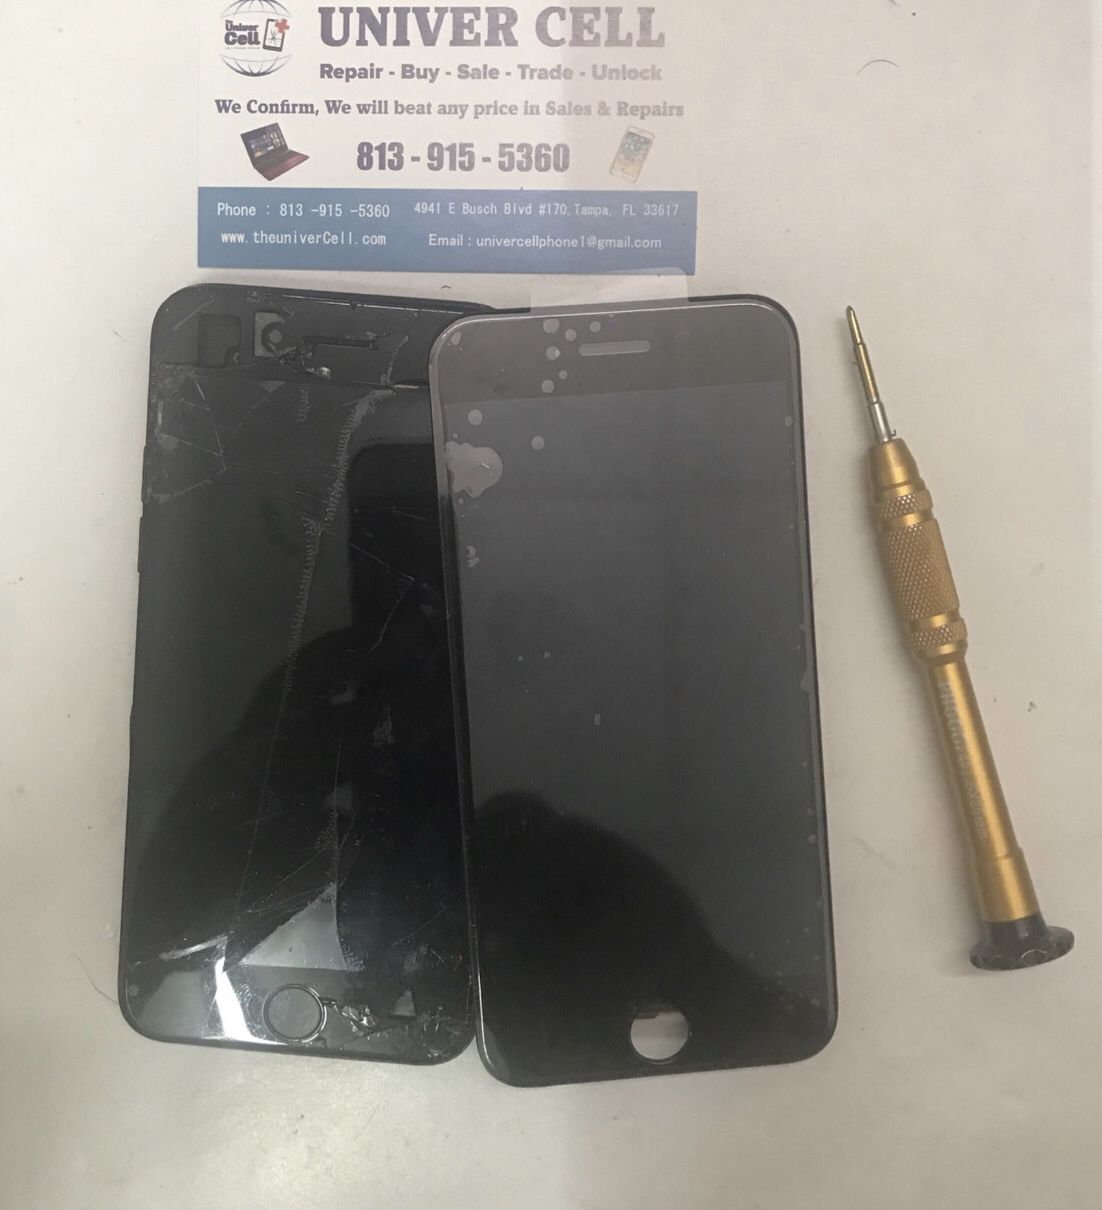 New Screens With LCD for All iPhones Can Be Done In 10 minutes Just $19 Plus Part @ Univercell 4941 E Busch Blvd #170 Tampa 33617